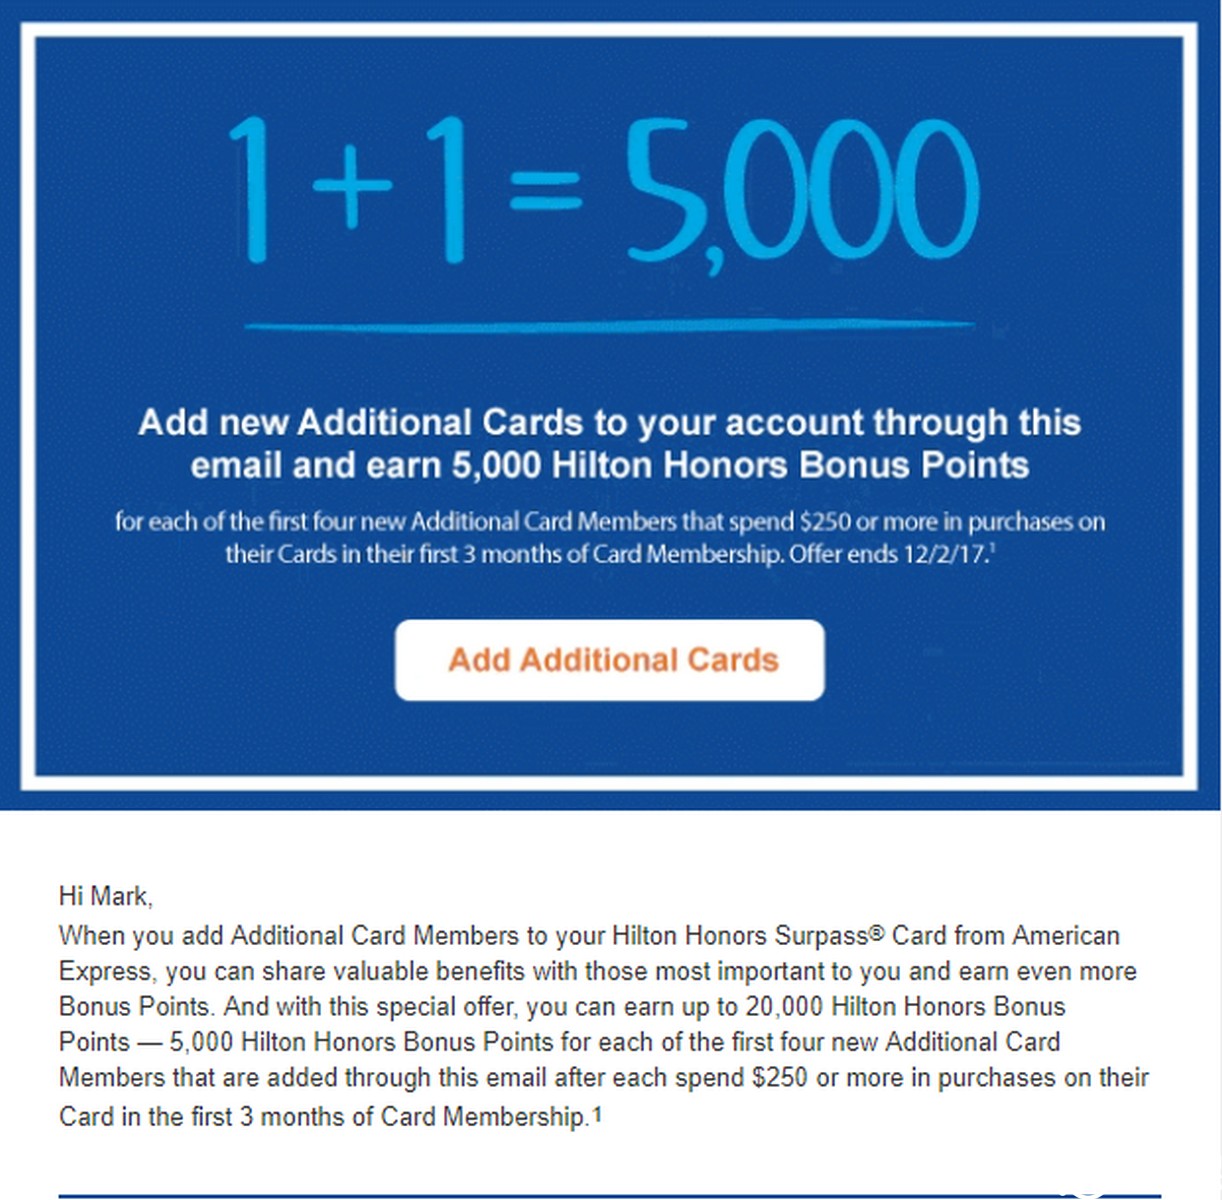 New American Express Surpass Authorized User Offer